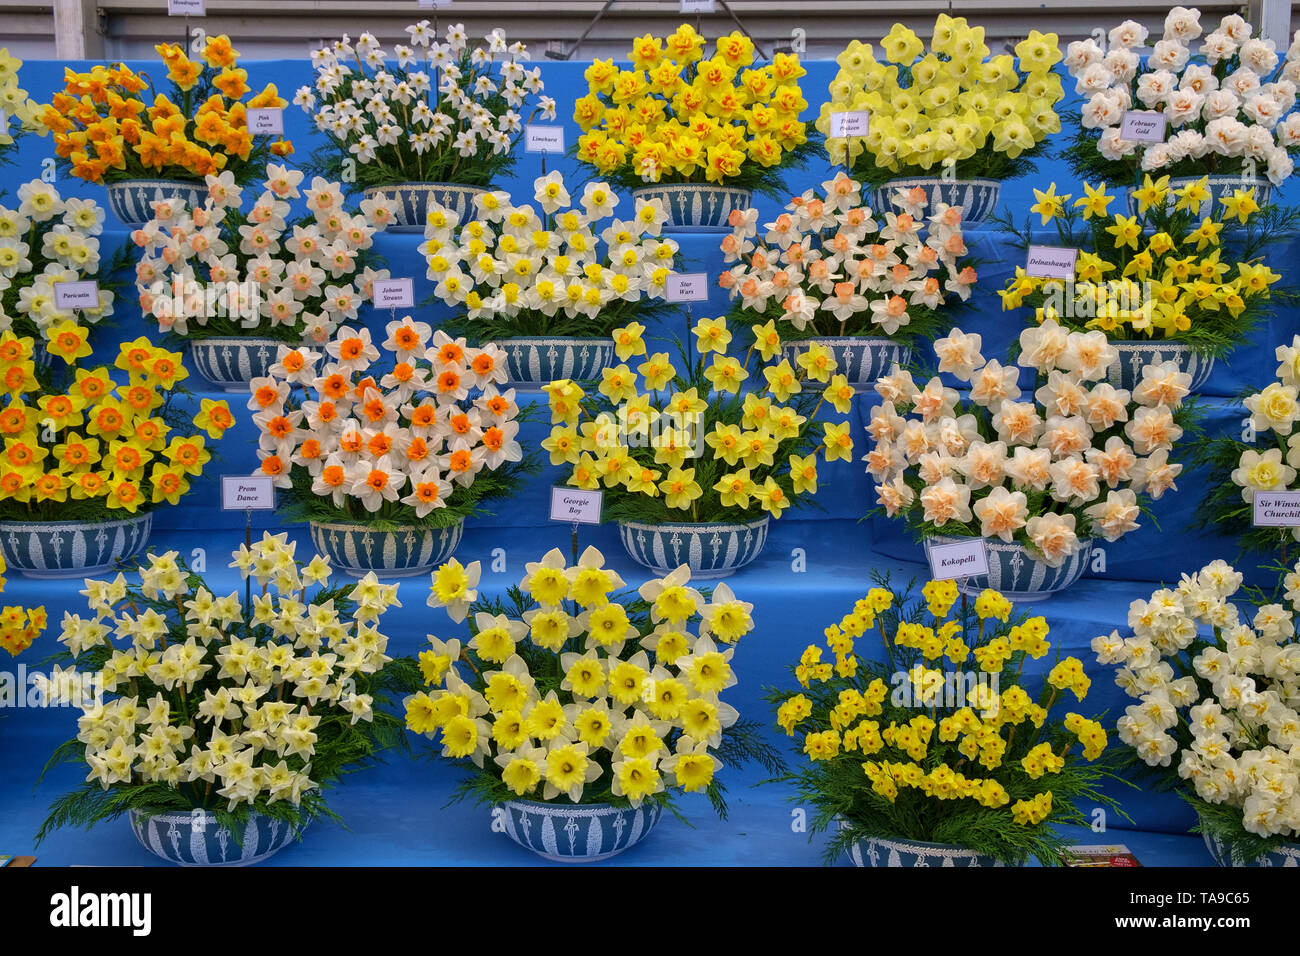 London, UK - May 22nd 2019: RHS Chelsea Flower Show, an award winning display of daffodils. Stock Photo